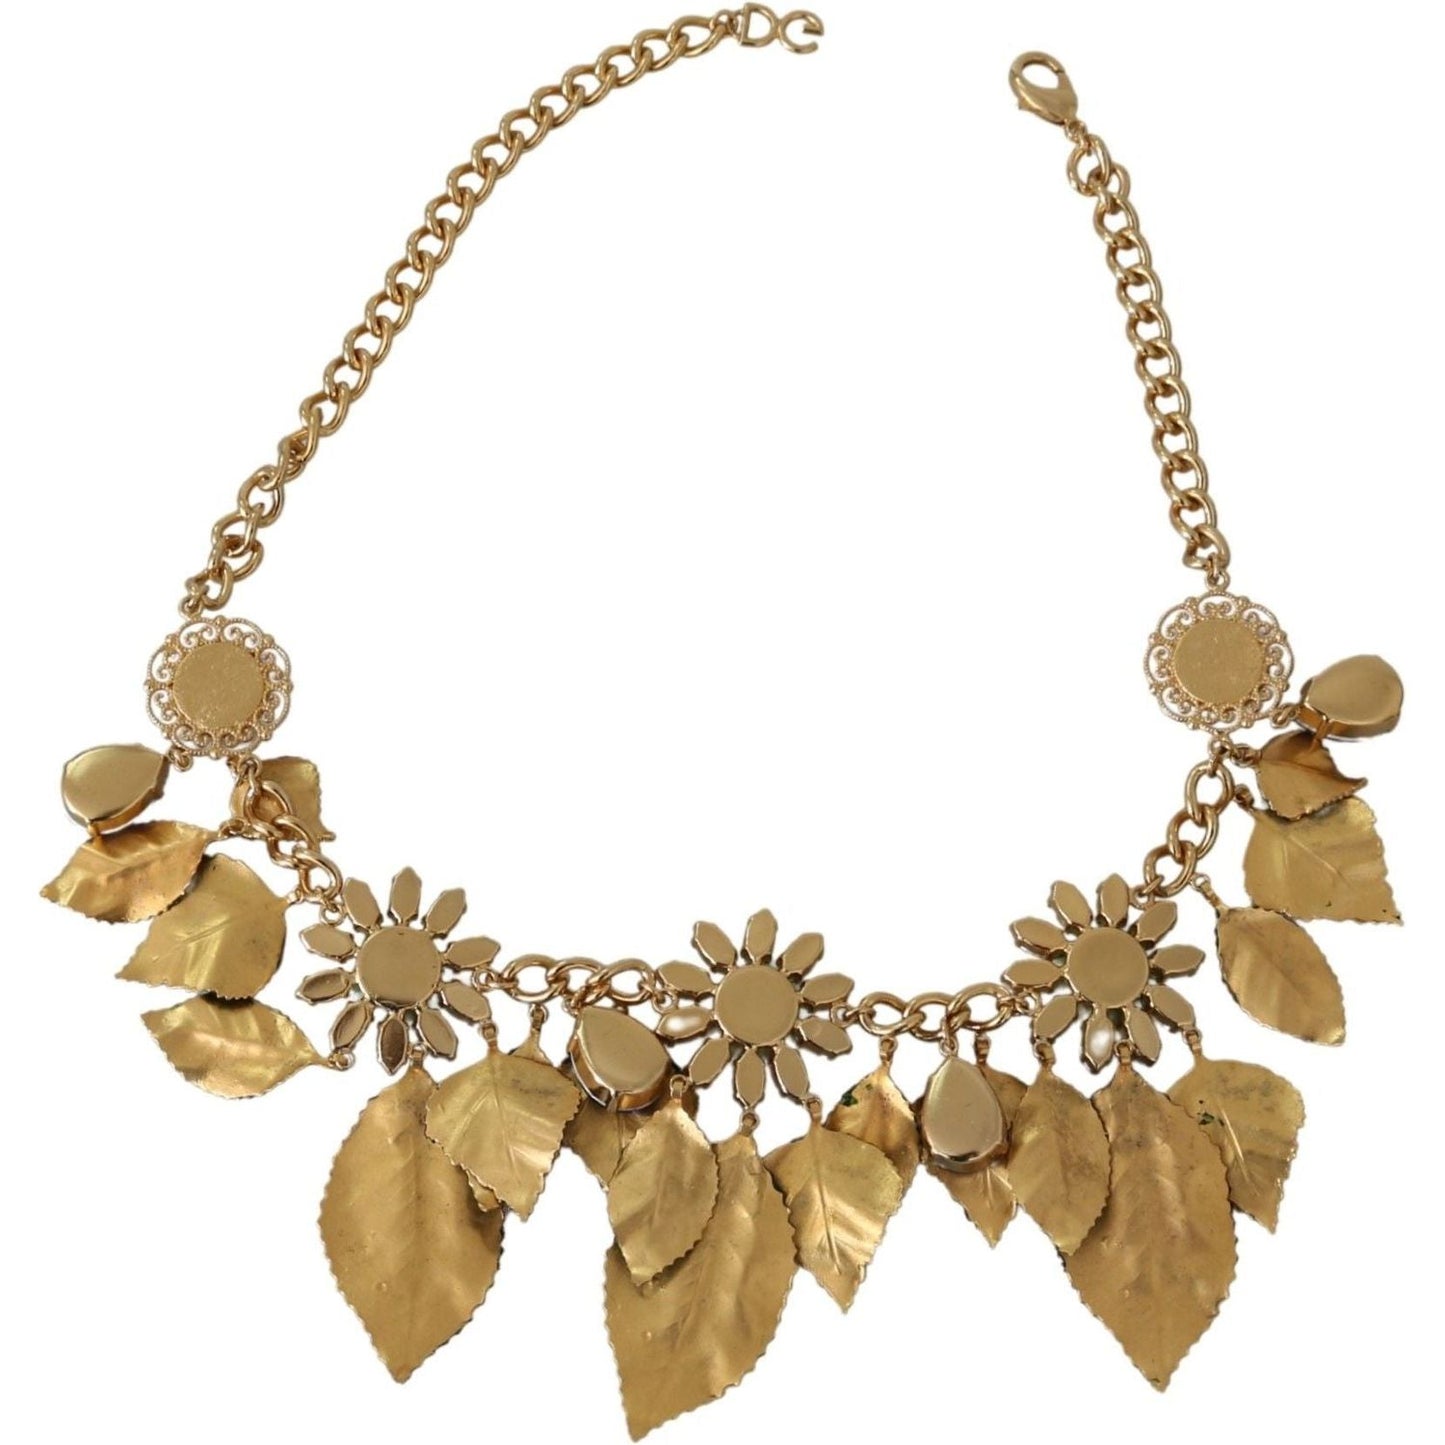 Dolce & Gabbana Elegant Crystal Charms Leaves Pendant Necklace Necklace green-leaves-gold-brass-crystal-flower-pendant-necklace